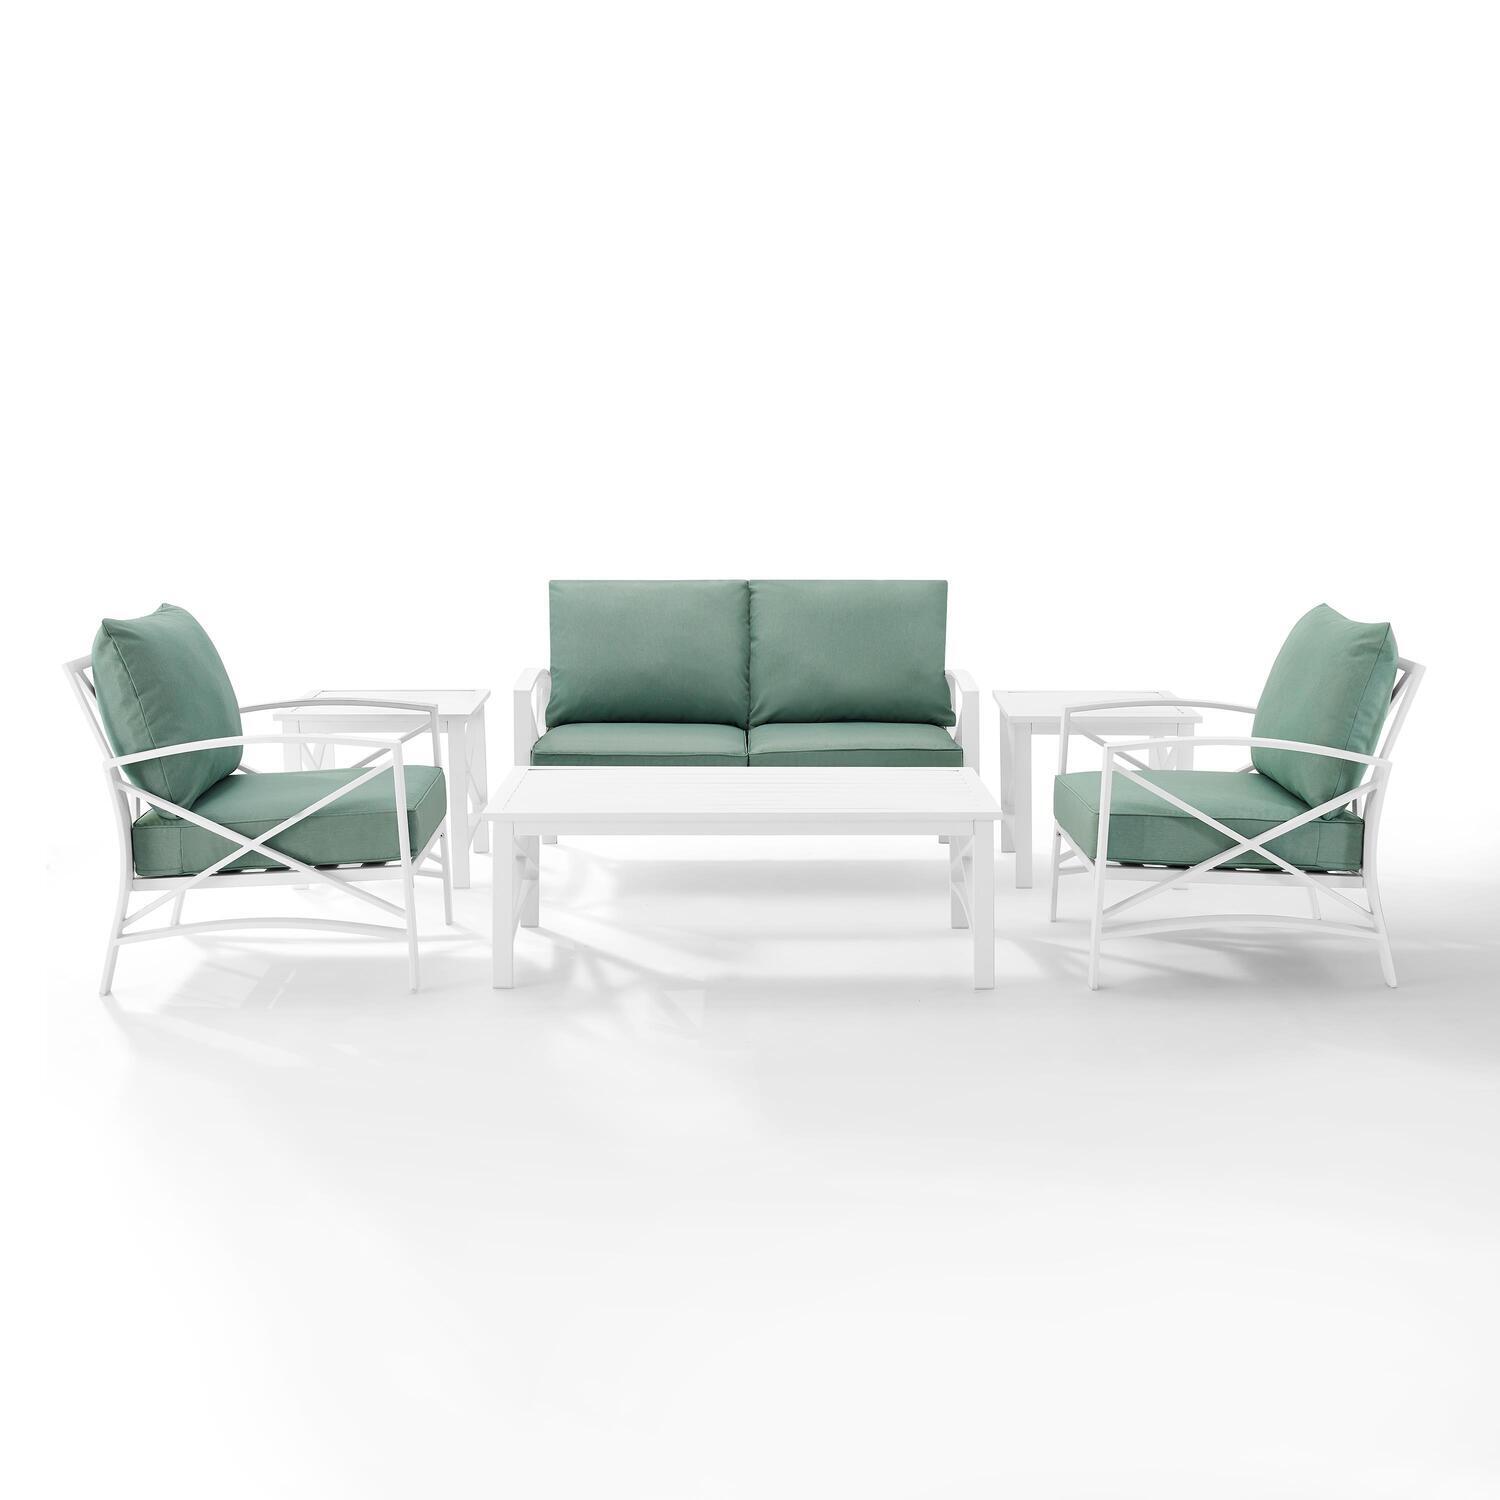 Crosley Kaplan 6Pc Outdoor Conversation Set- Loveseat, 2 Chairs, 2 Side Tables, Coffee Table - image 1 of 6